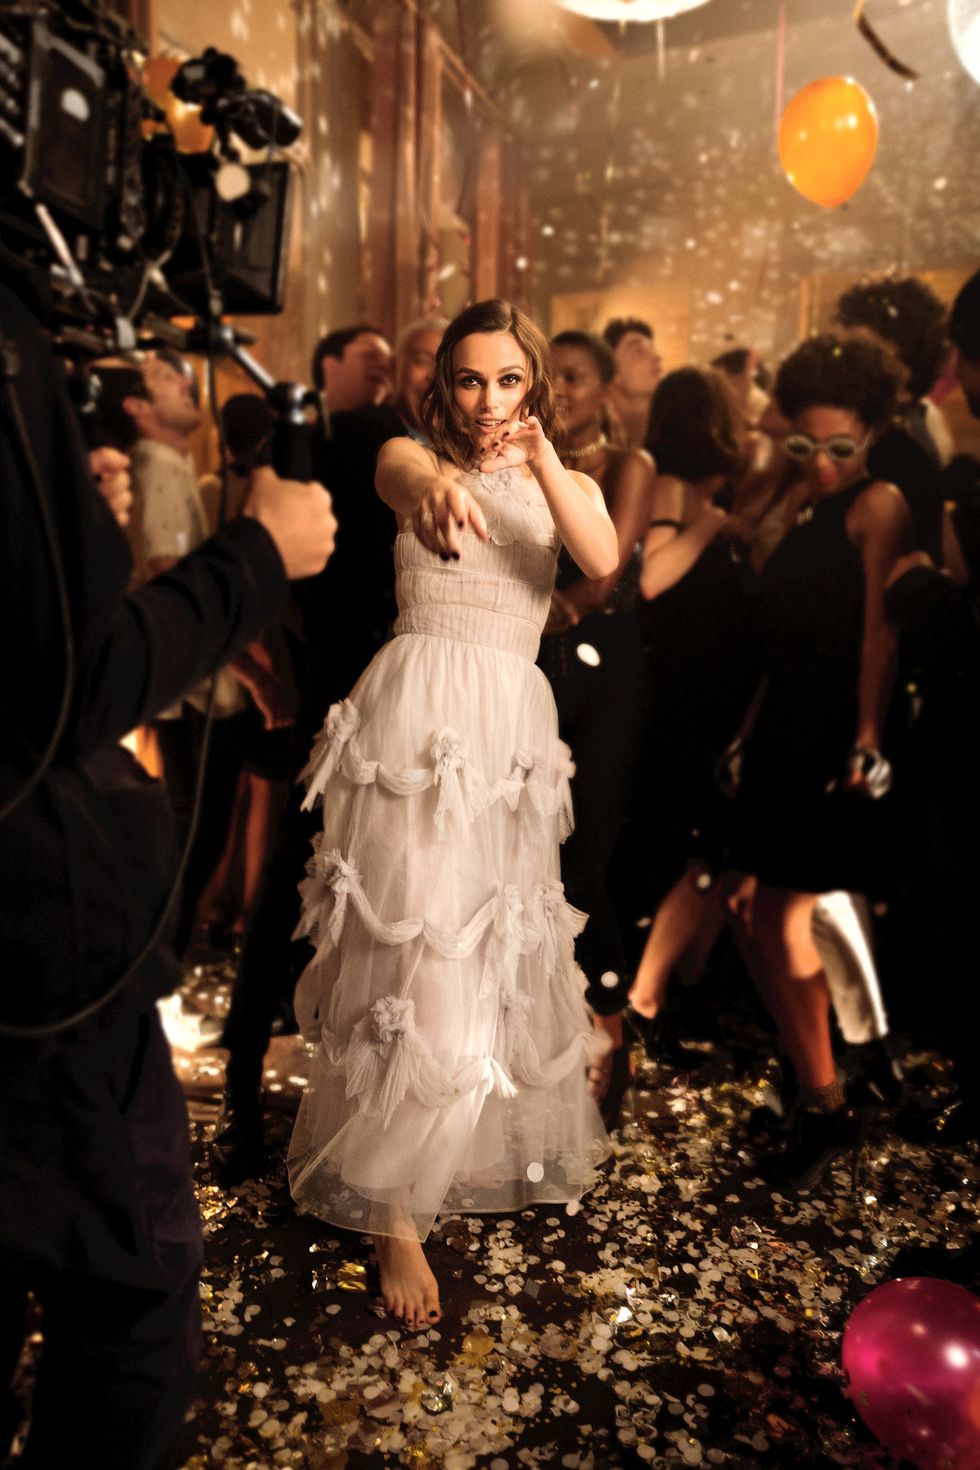 See Keira Knightley front the new Chanel fragrance, 10 years after her  first campaign